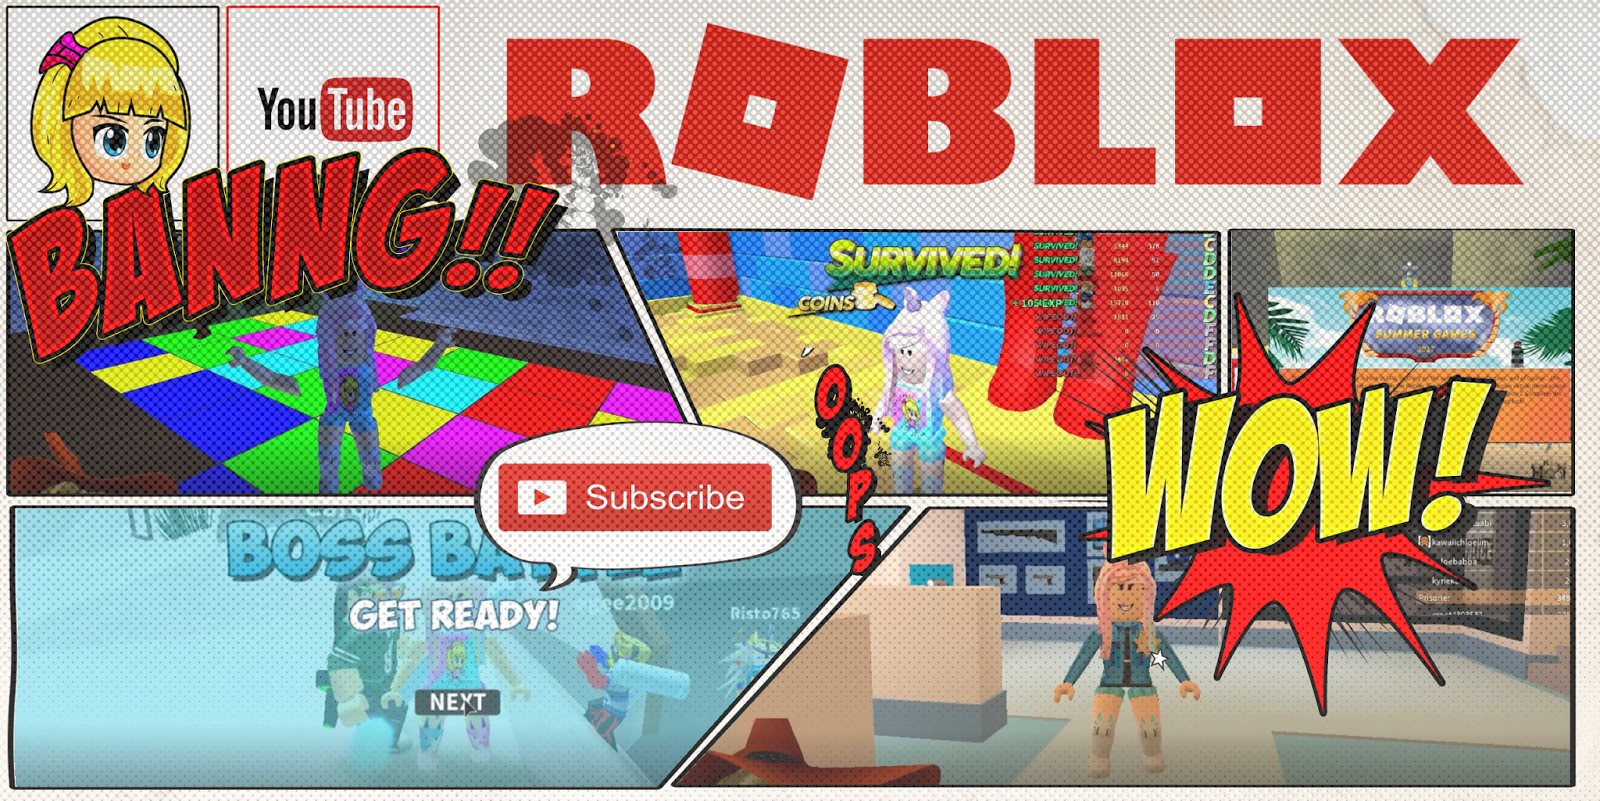 Roblox Gameplay 3 Eggs Getting The Chaotic Egg Of Catastrophes Eggs On Ice Tallaheggsee Zombie Slayer Easter Egg Hunt 2019 Steemit - event how to get the chaotic egg of catastrophes roblox egg hunt 2019 disaster island